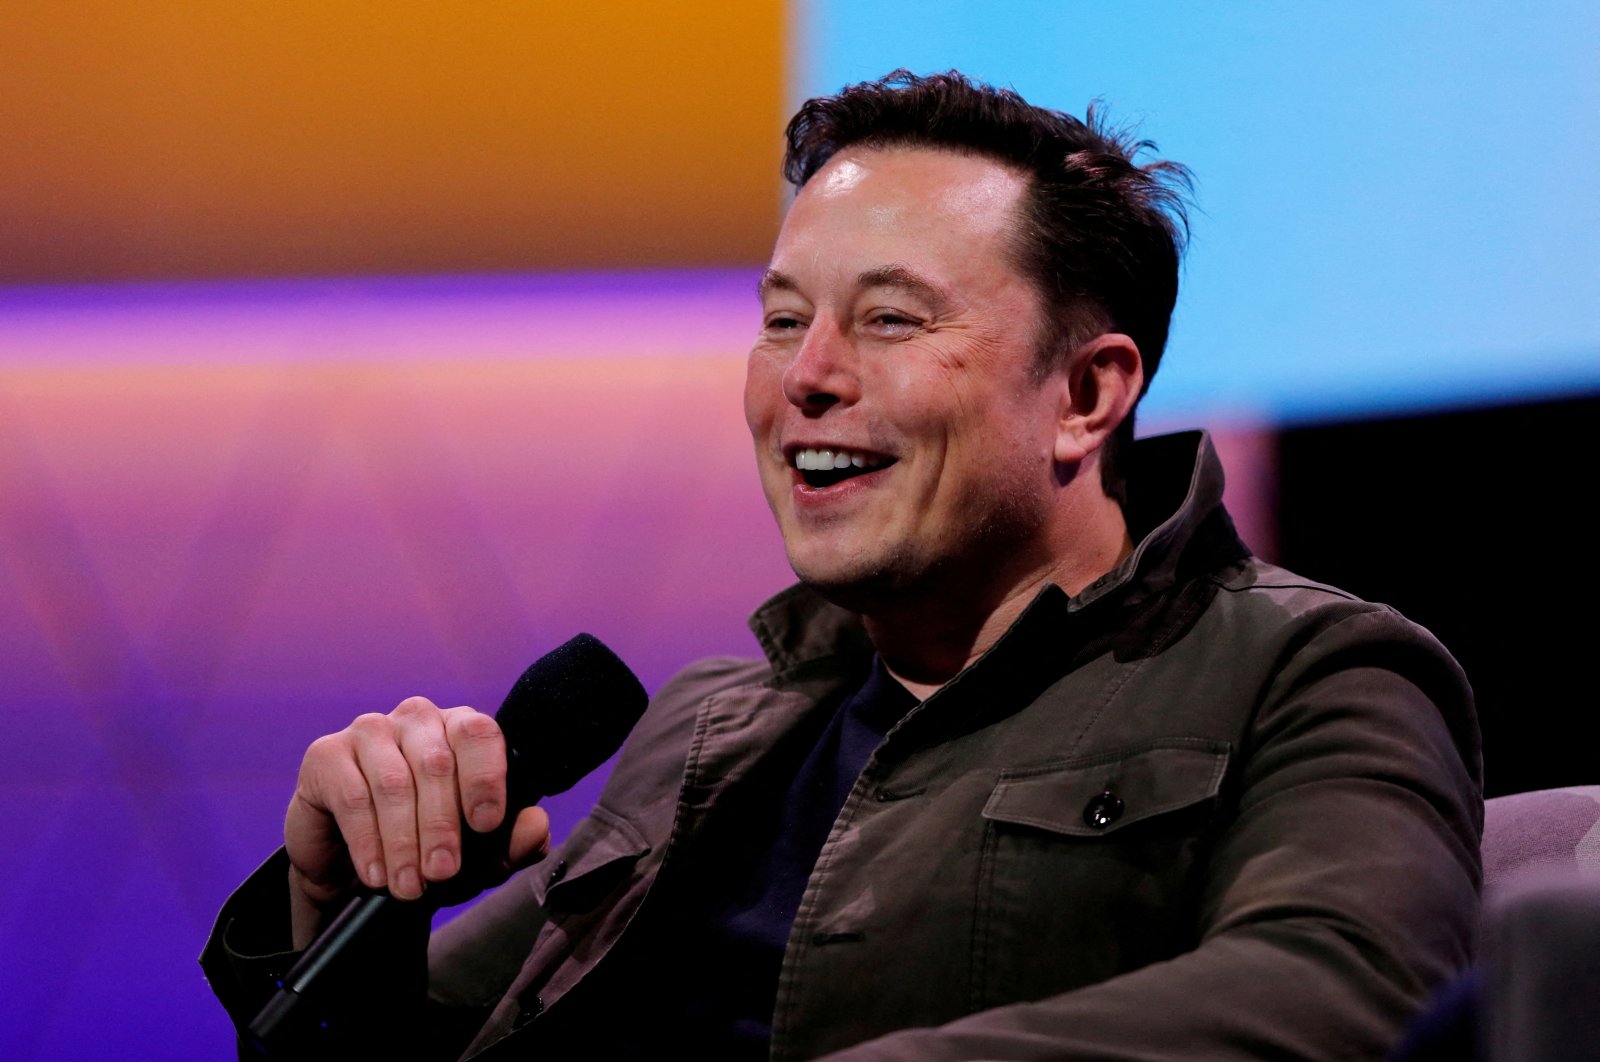 SpaceX owner and Tesla CEO Elon Musk speaks during a conversation with game designer Todd Howard (not pictured) at the E3 gaming convention in Los Angeles, California, June 13, 2019. (Reuters Photo)